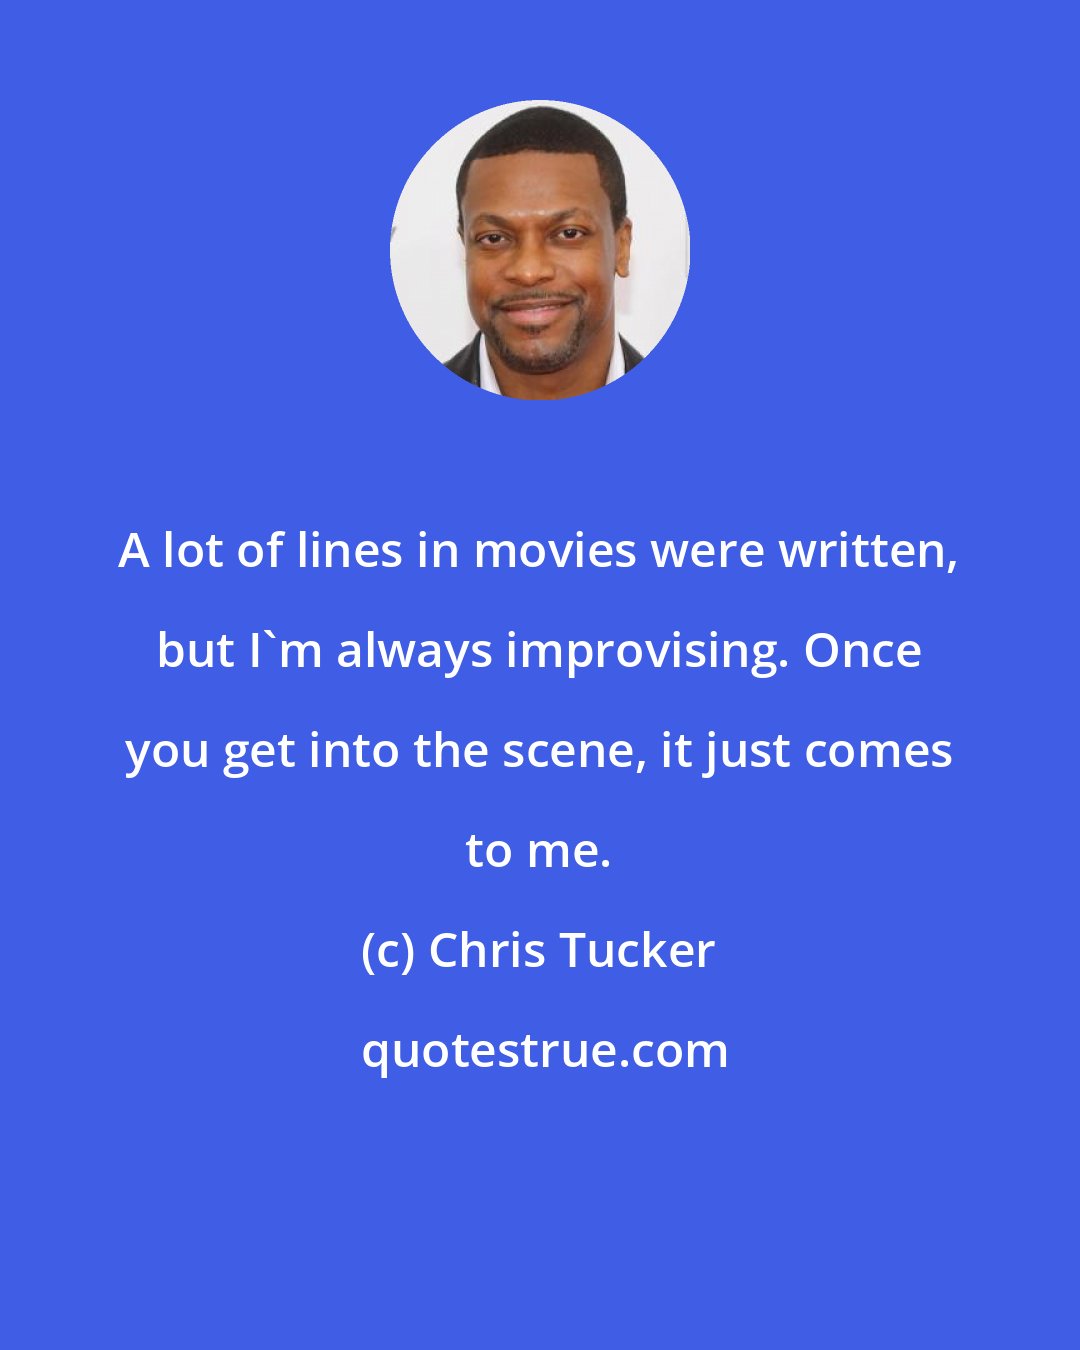 Chris Tucker: A lot of lines in movies were written, but I'm always improvising. Once you get into the scene, it just comes to me.